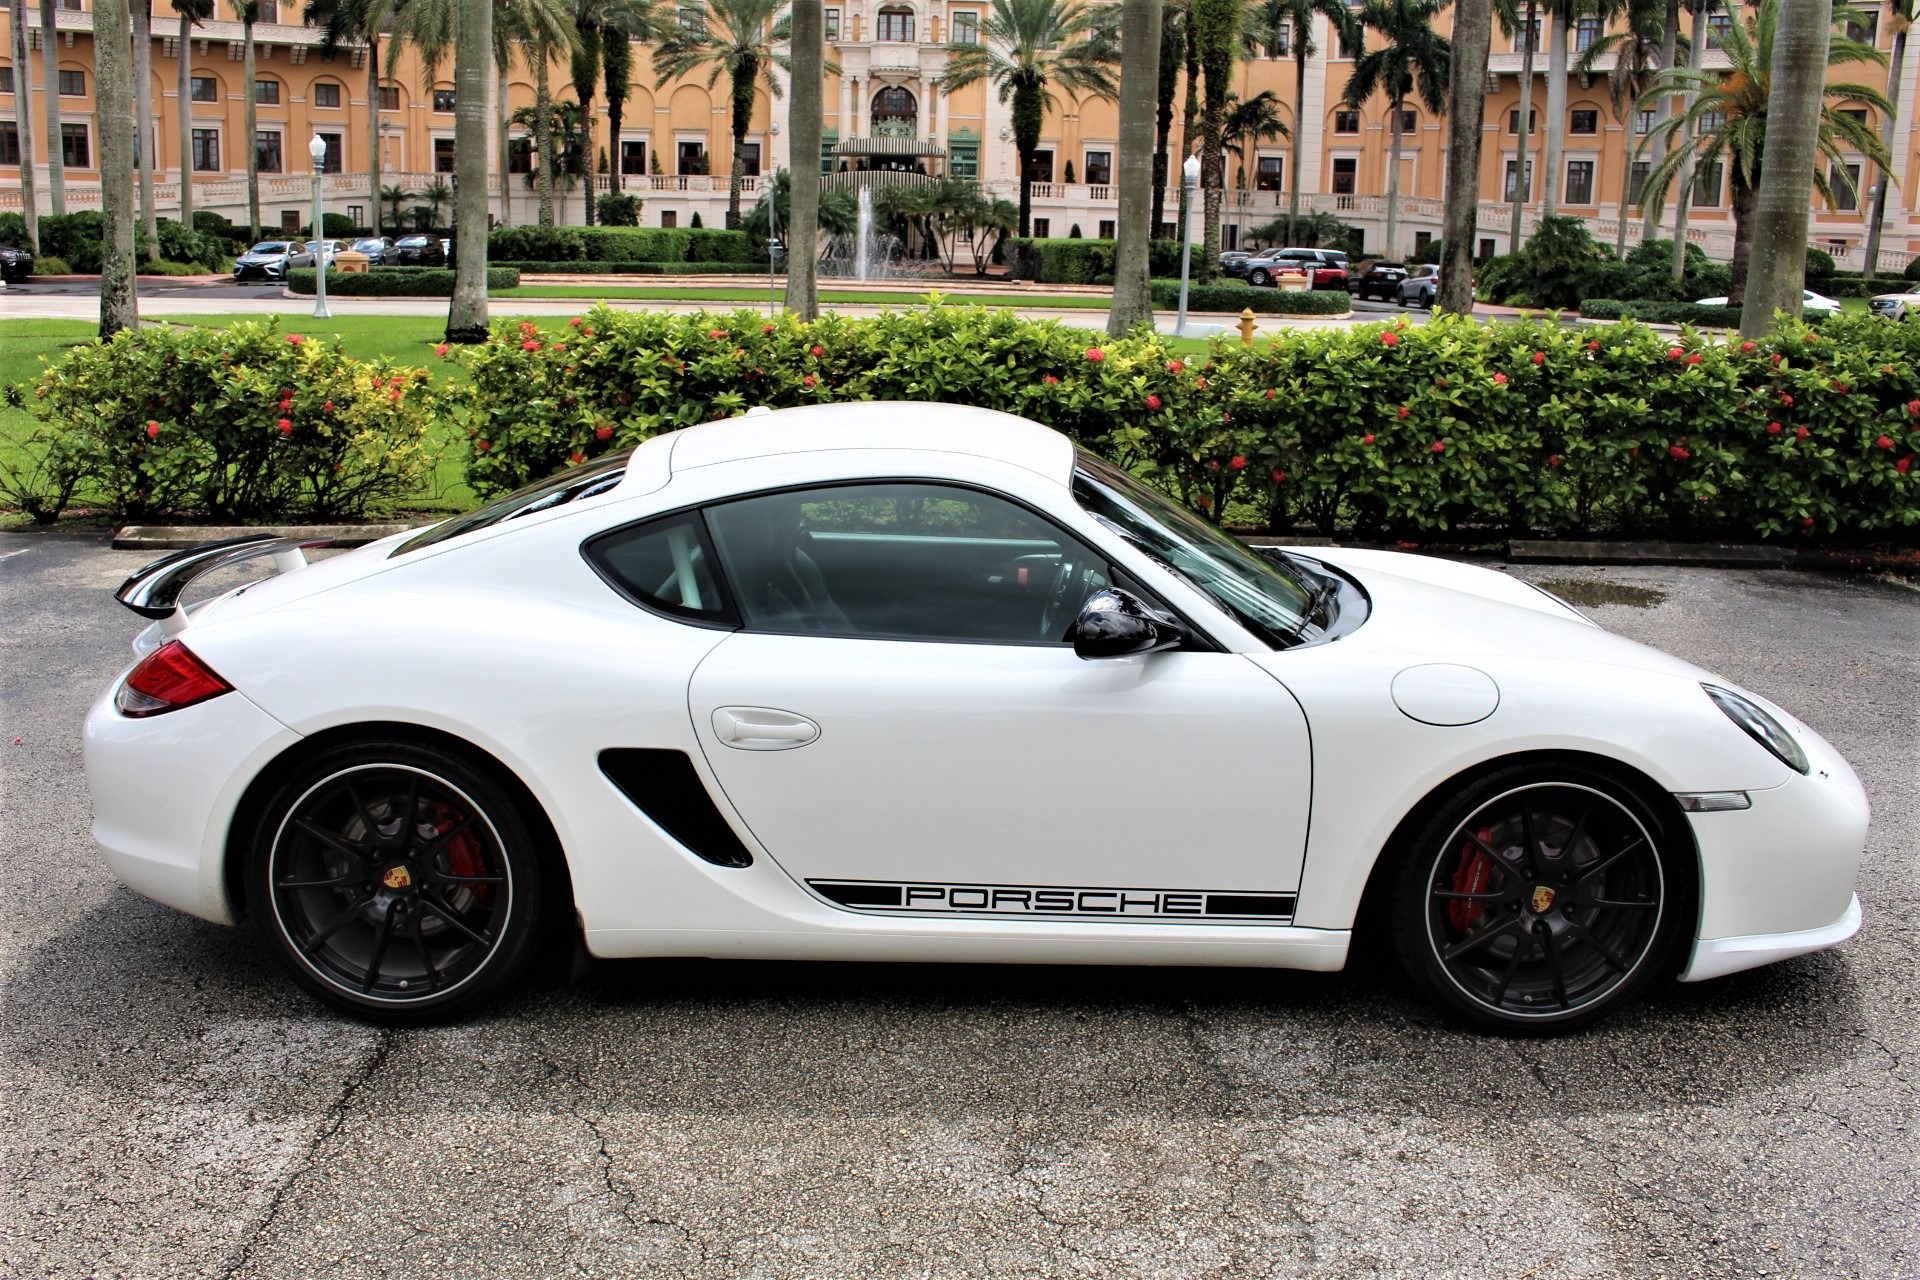 Used 2012 Porsche Cayman R for sale Sold at The Gables Sports Cars in Miami FL 33146 2